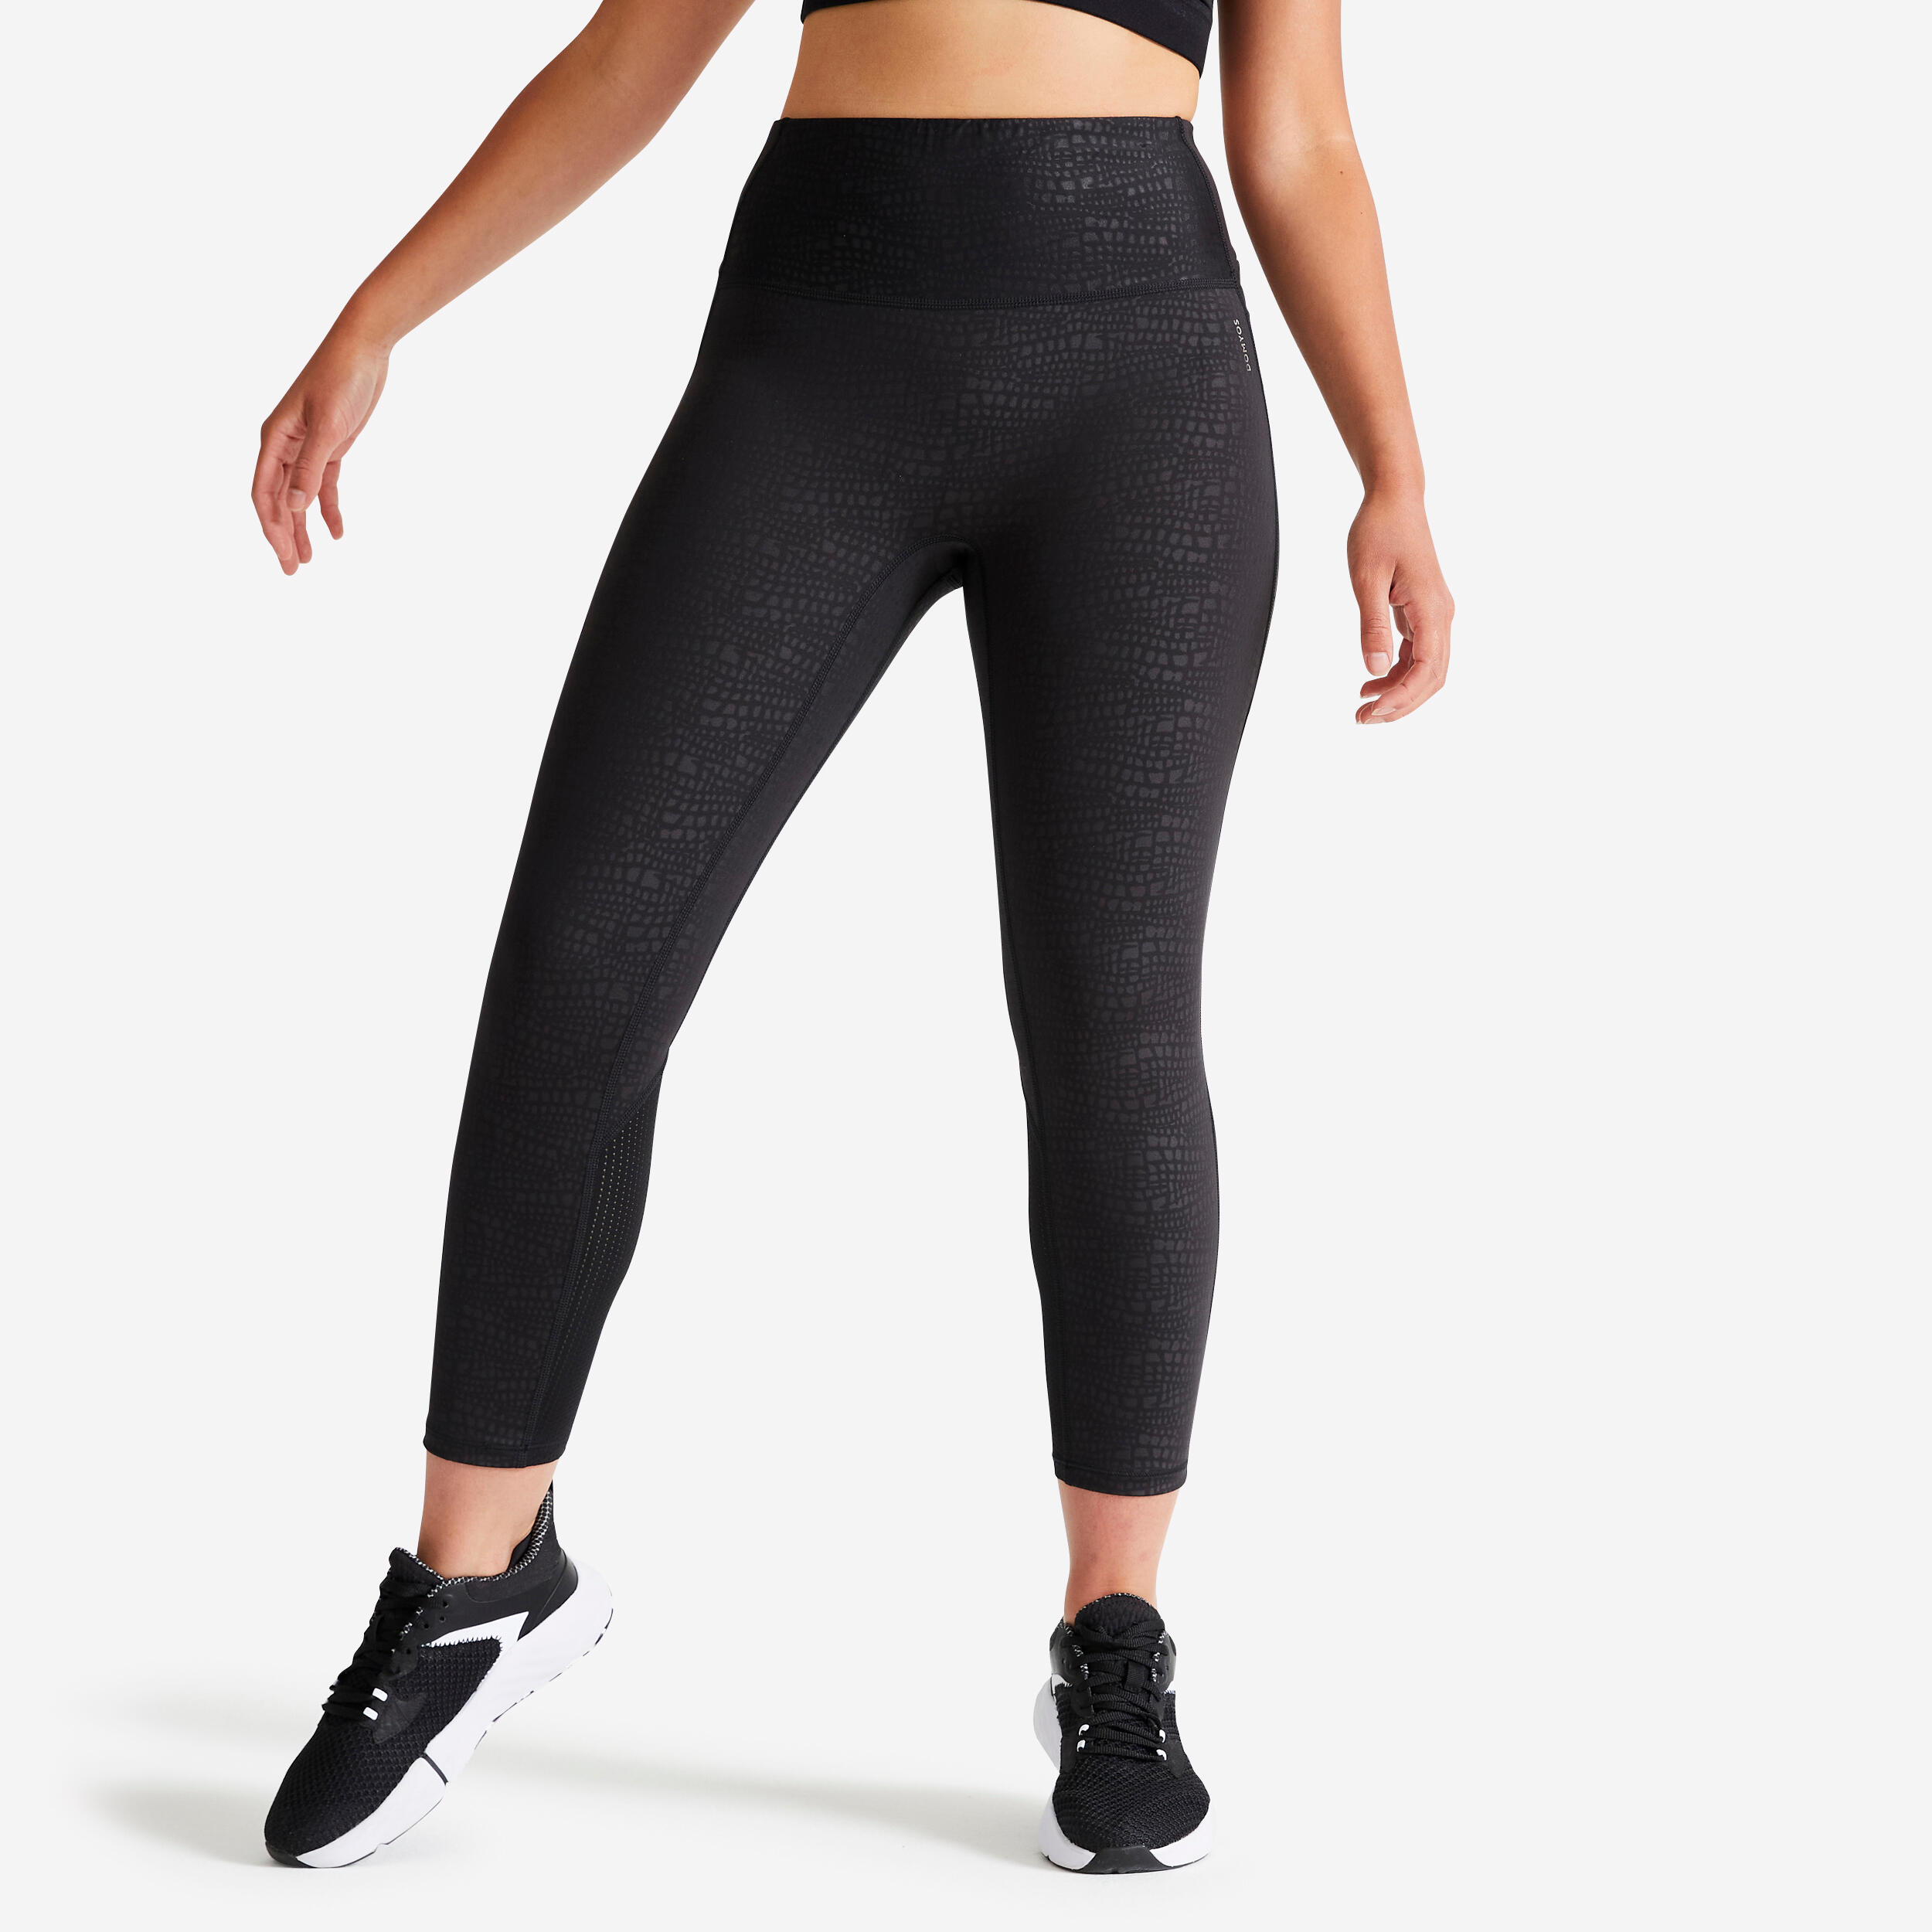 Decathlon launches 'leggings for everyone' as part of body positive gym  range | The Sun